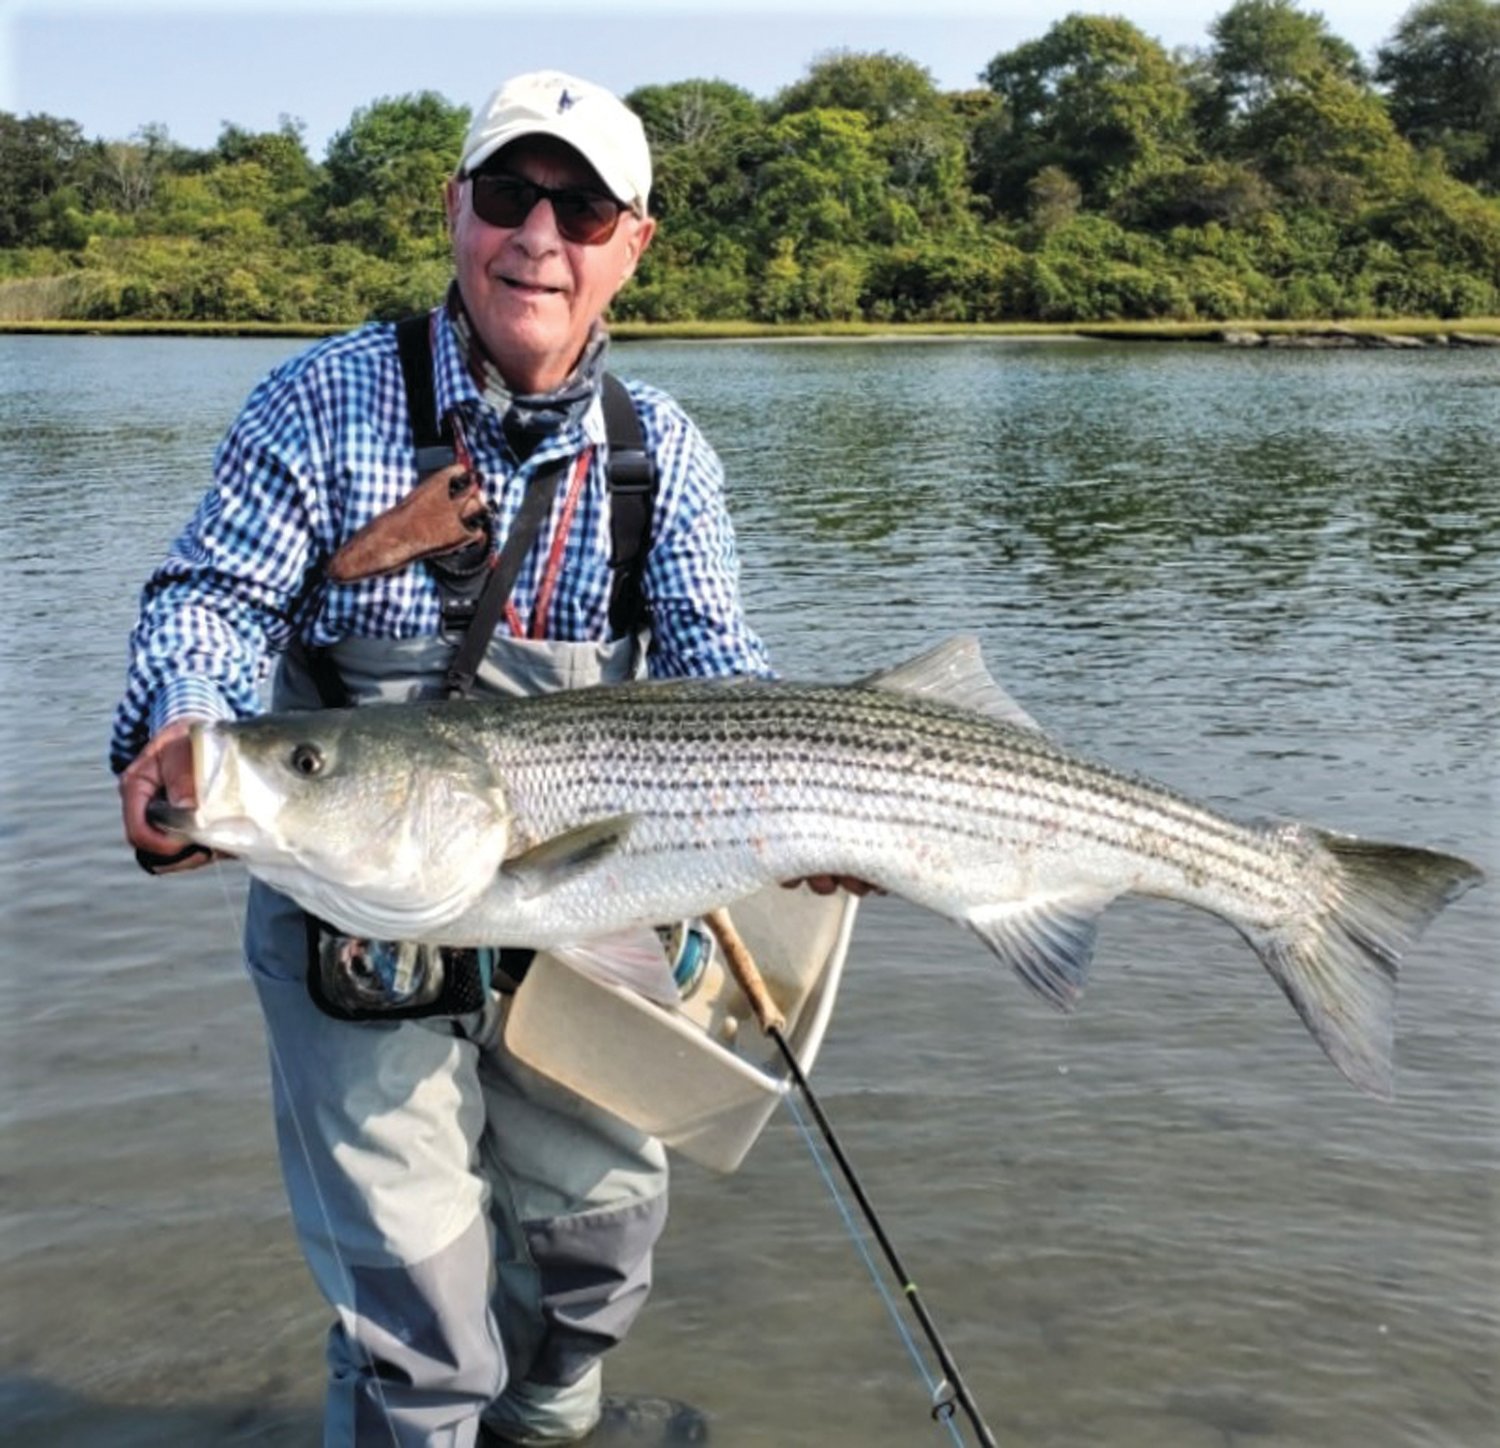 FLY FISHING: Expert fly fishing guide Ed Lombardo with a striped bass caught on Narrow River, Narragansett, RI with a Hot Pink Ed’s Fly. (Submitted photo)